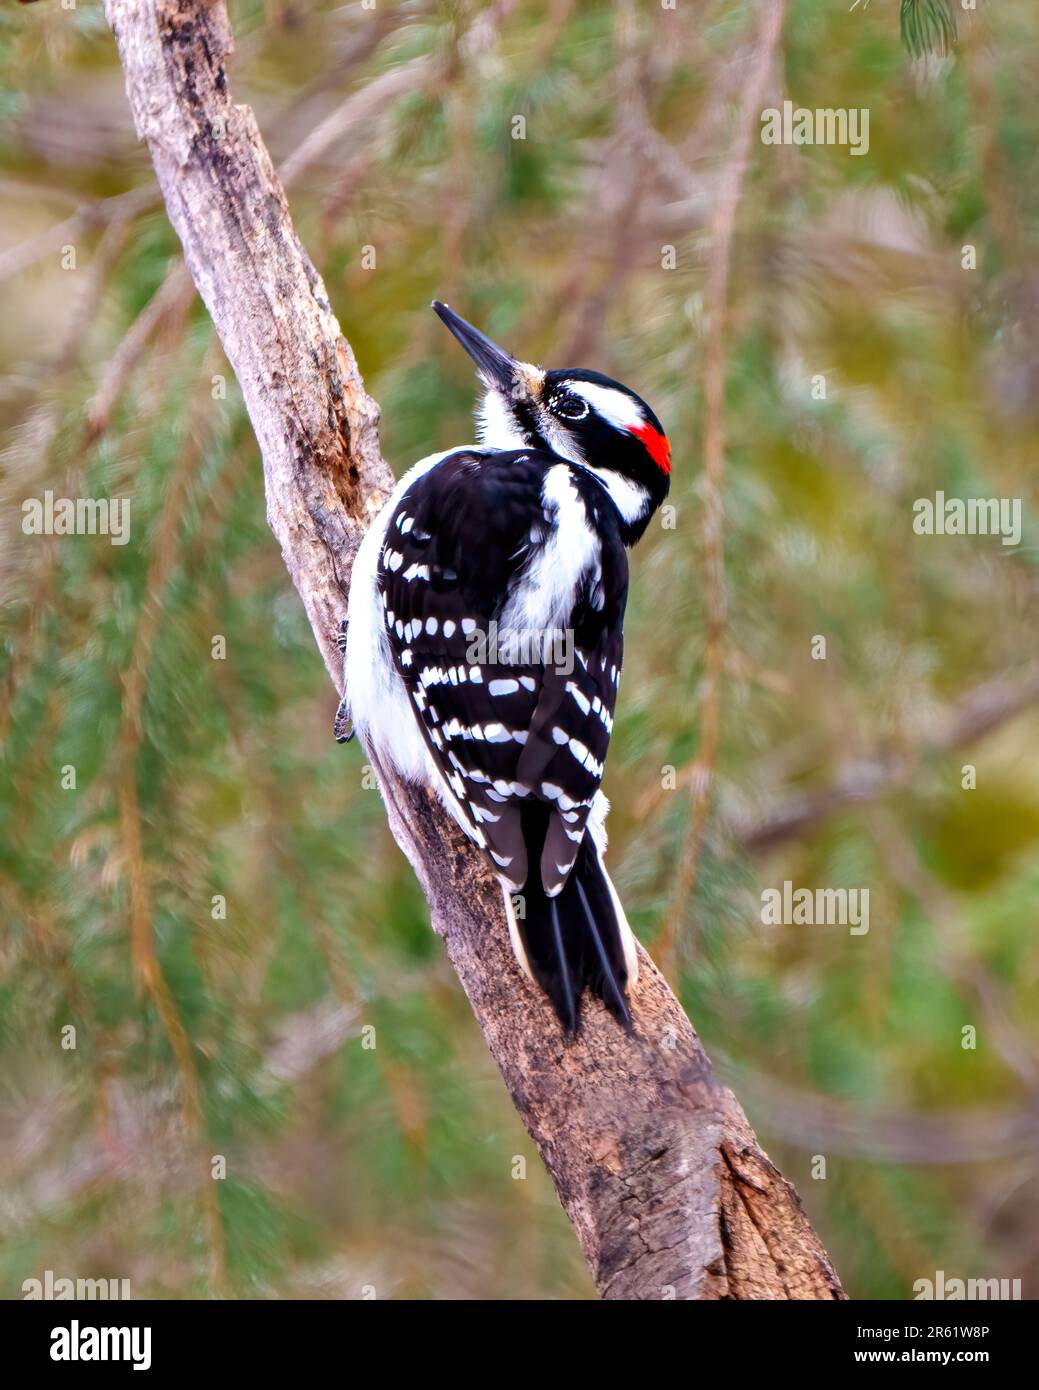 Woodpecker male close-up rear view gripping to a tree branch with a blur coniferous evergreen trees background in its environment and habitat. Stock Photo